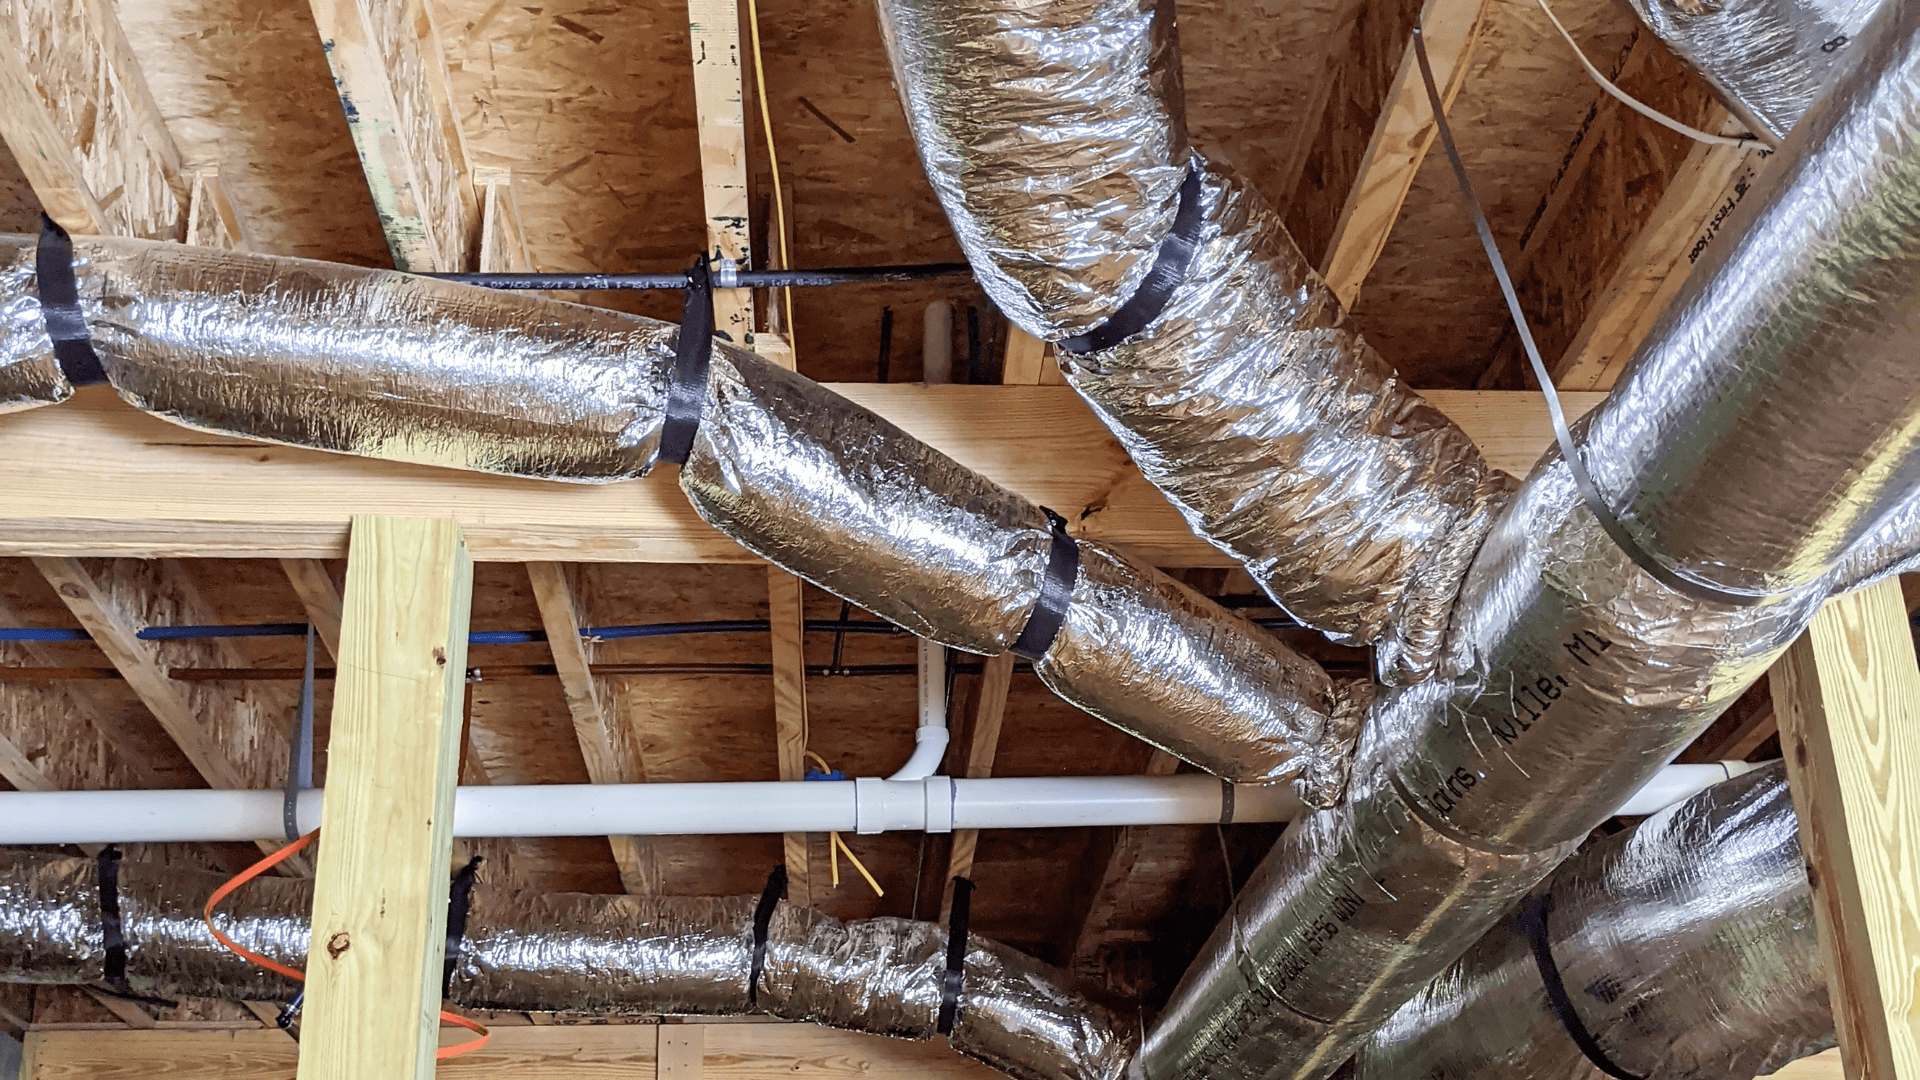 A ductwork inspection with North Shore Home Energy can catch invisible leaks, clogged ventilation, and more. Contact us today!